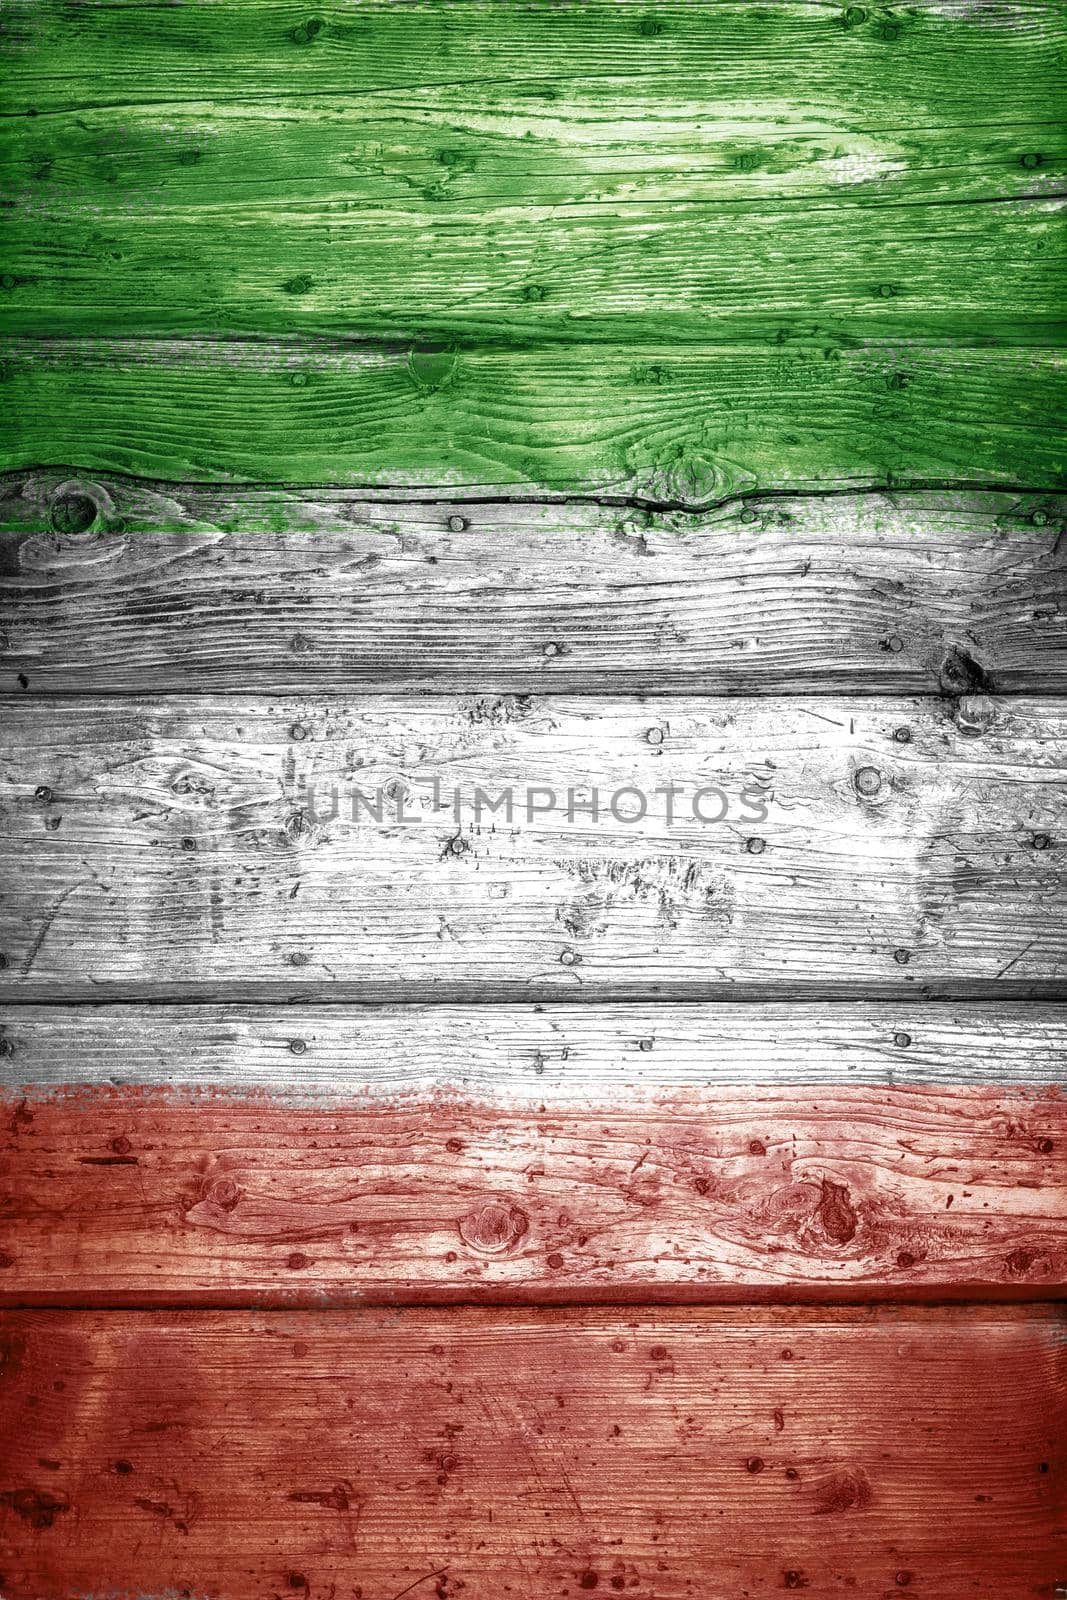 Italy Flag on wood background. It can be used as concepts and backgrounds.